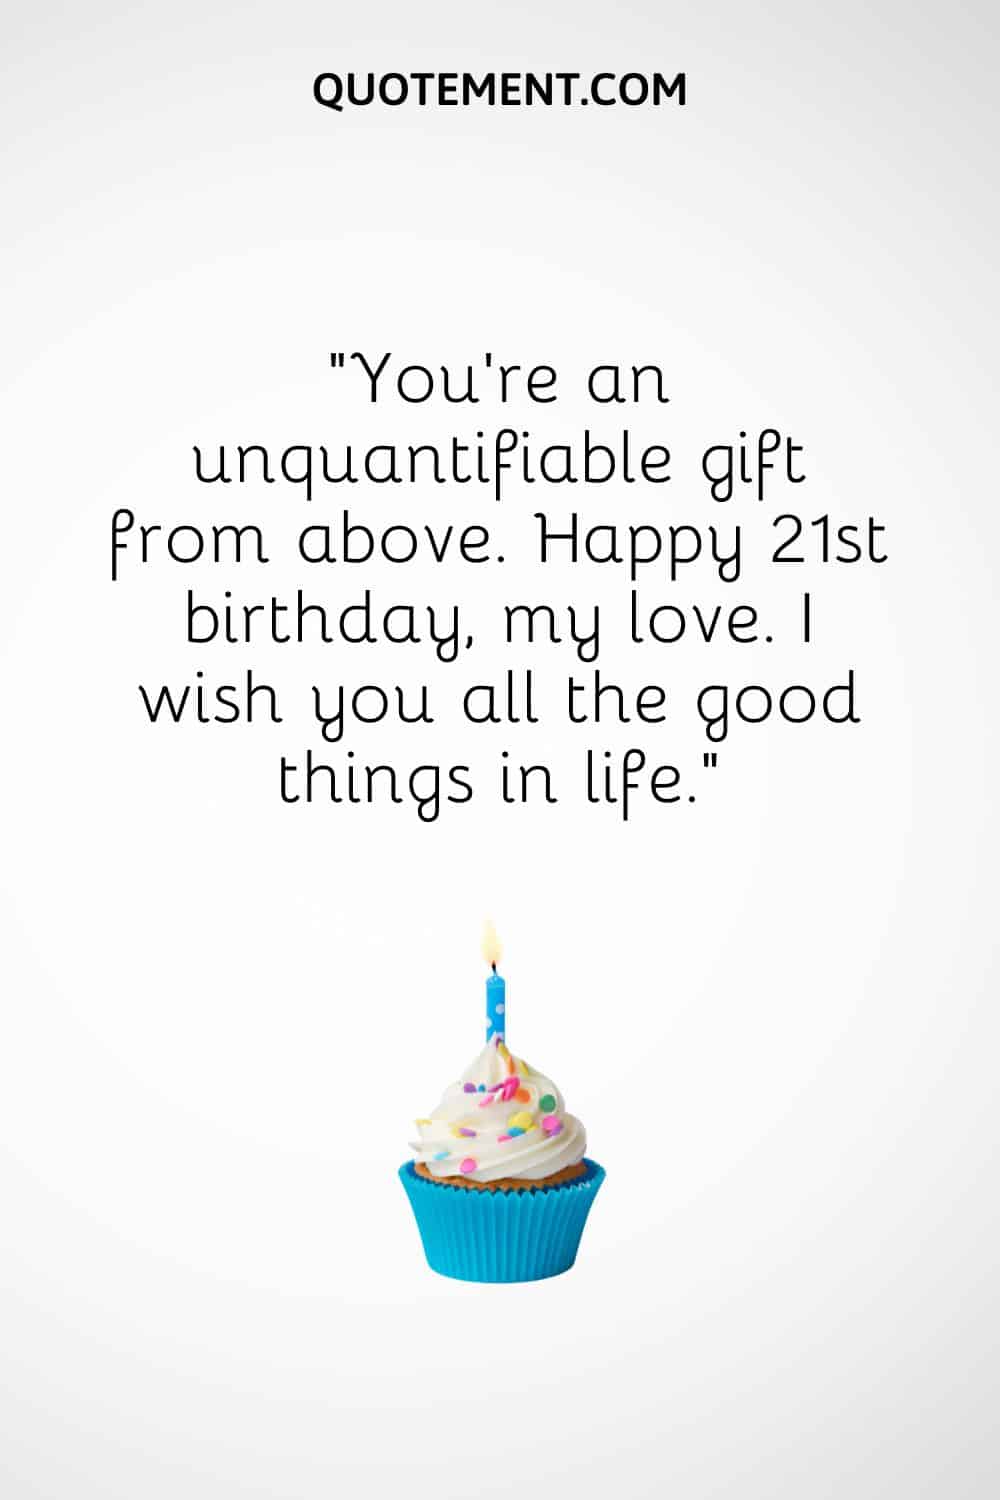 You’re an unquantifiable gift from above